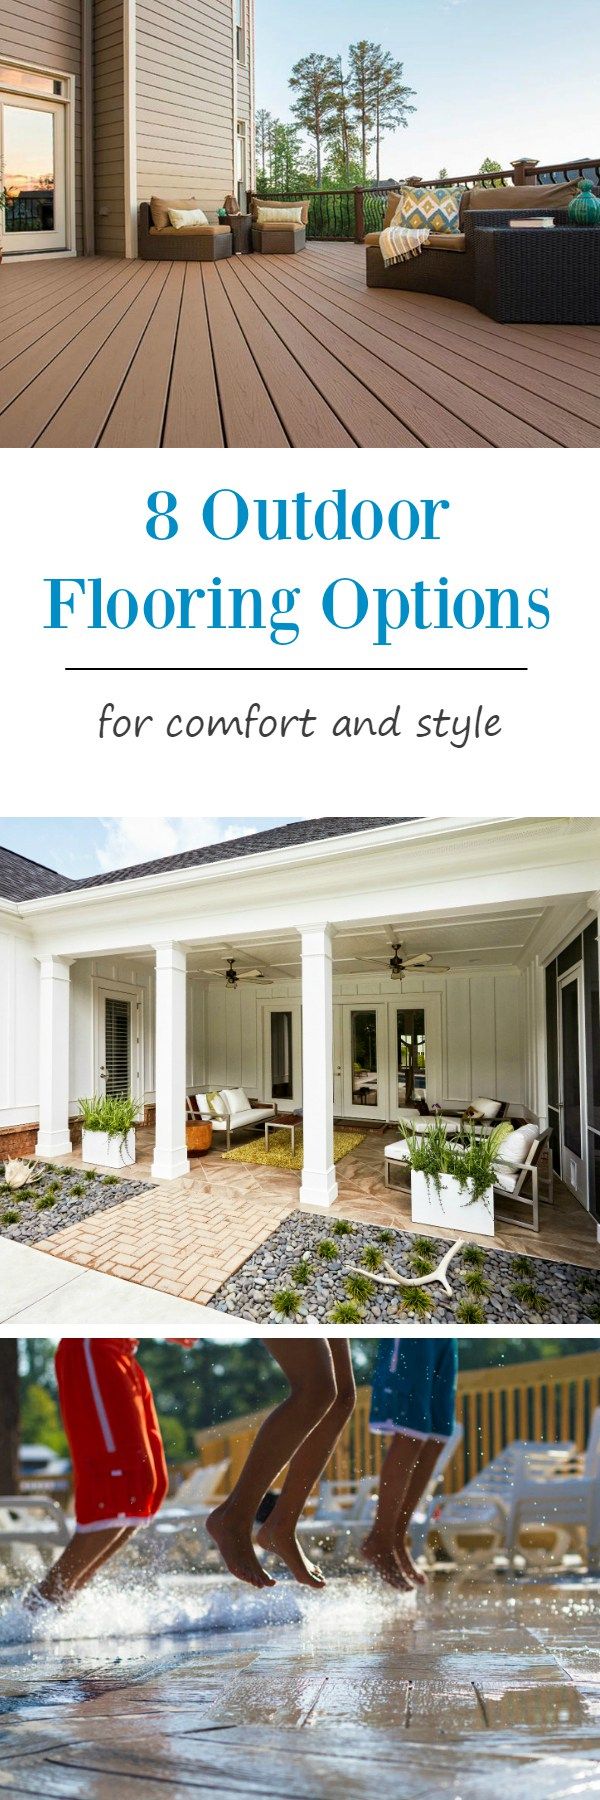 8 Outdoor Flooring Options for Style & Comfort...